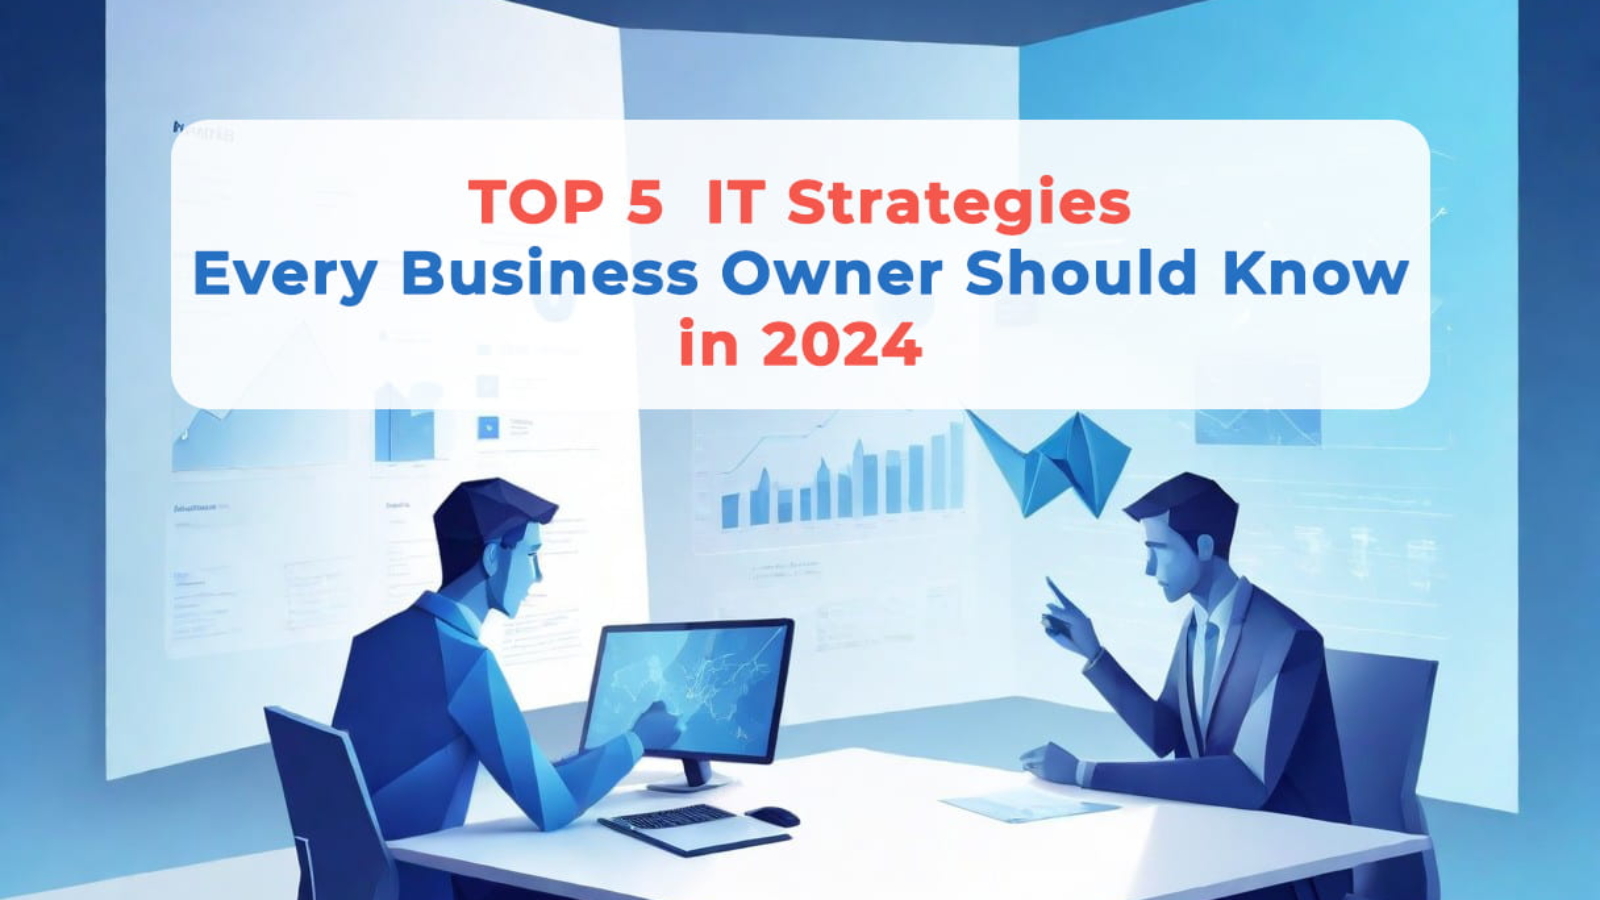 Top 5 IT Strategies Every Business Owner Should Know in 2024